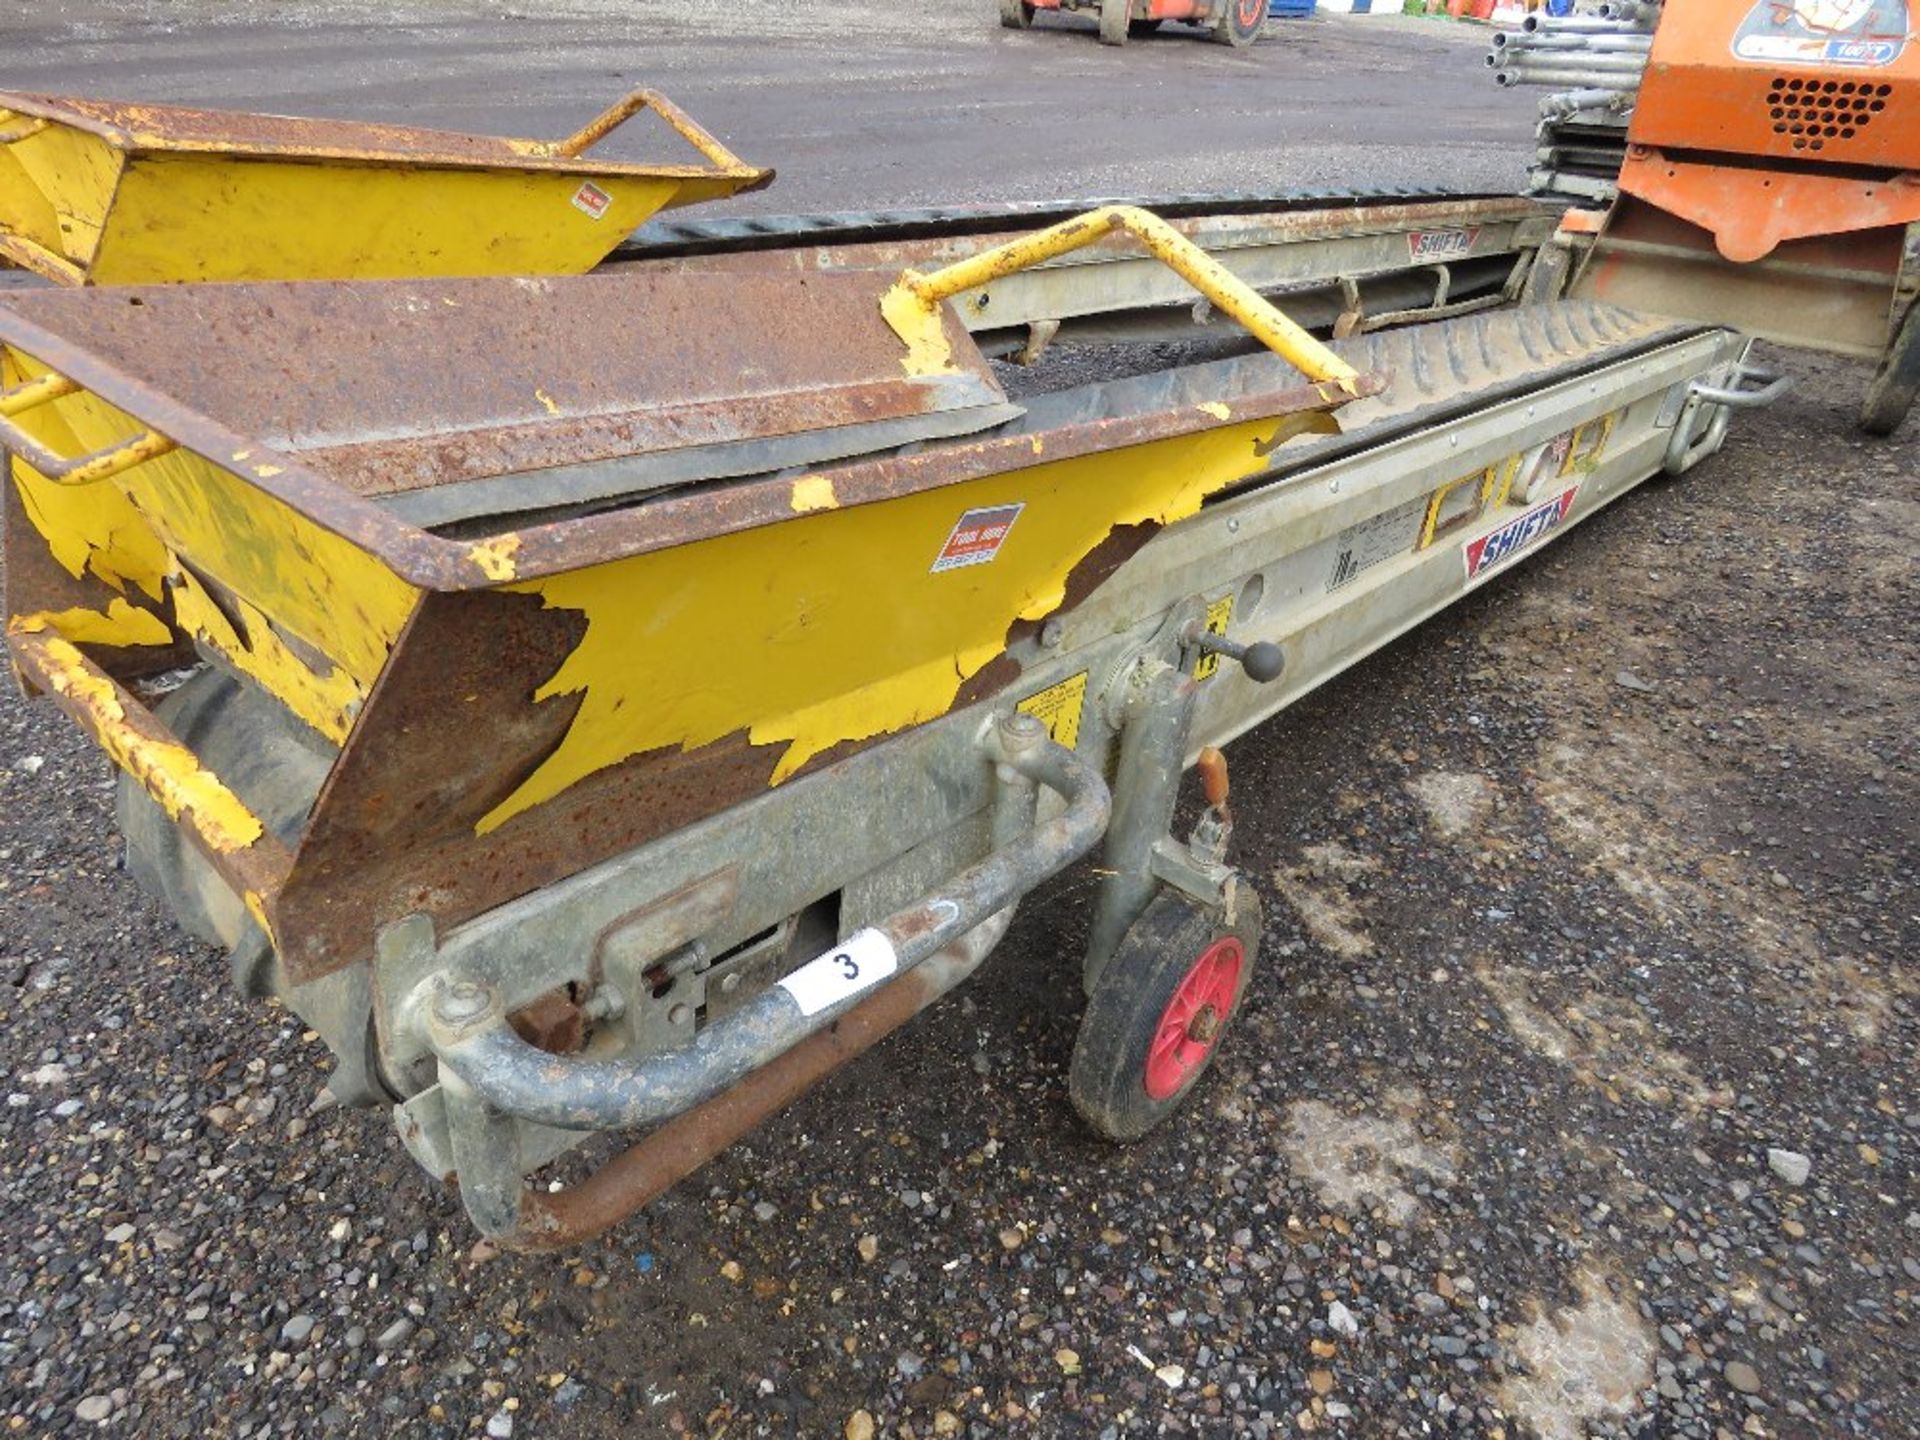 SHIFTA 110 VOLT MUCK CONVEYOR WITH HOPPER, 3.2M LENGTH APPROX. THIS LOT IS SOLD UNDER THE AUCTION